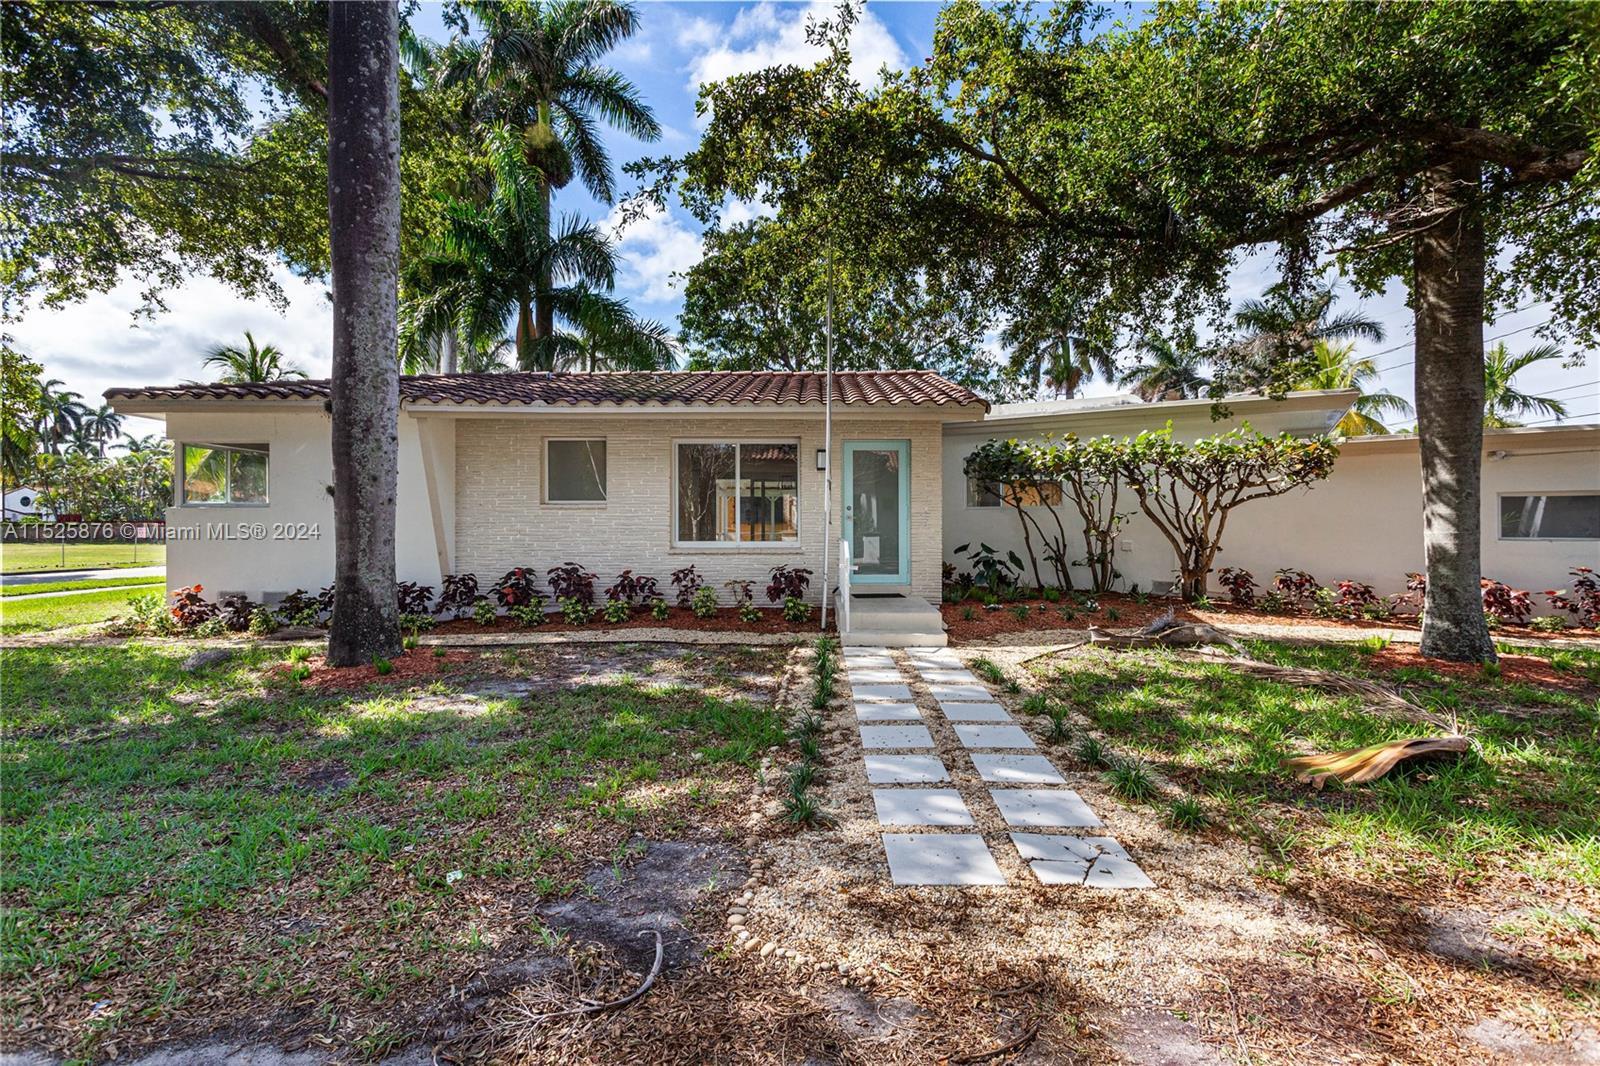 Discover the charm of Hollywood Lakes with this 3-bed, 2.5-bath home, minutes from pristine beaches,